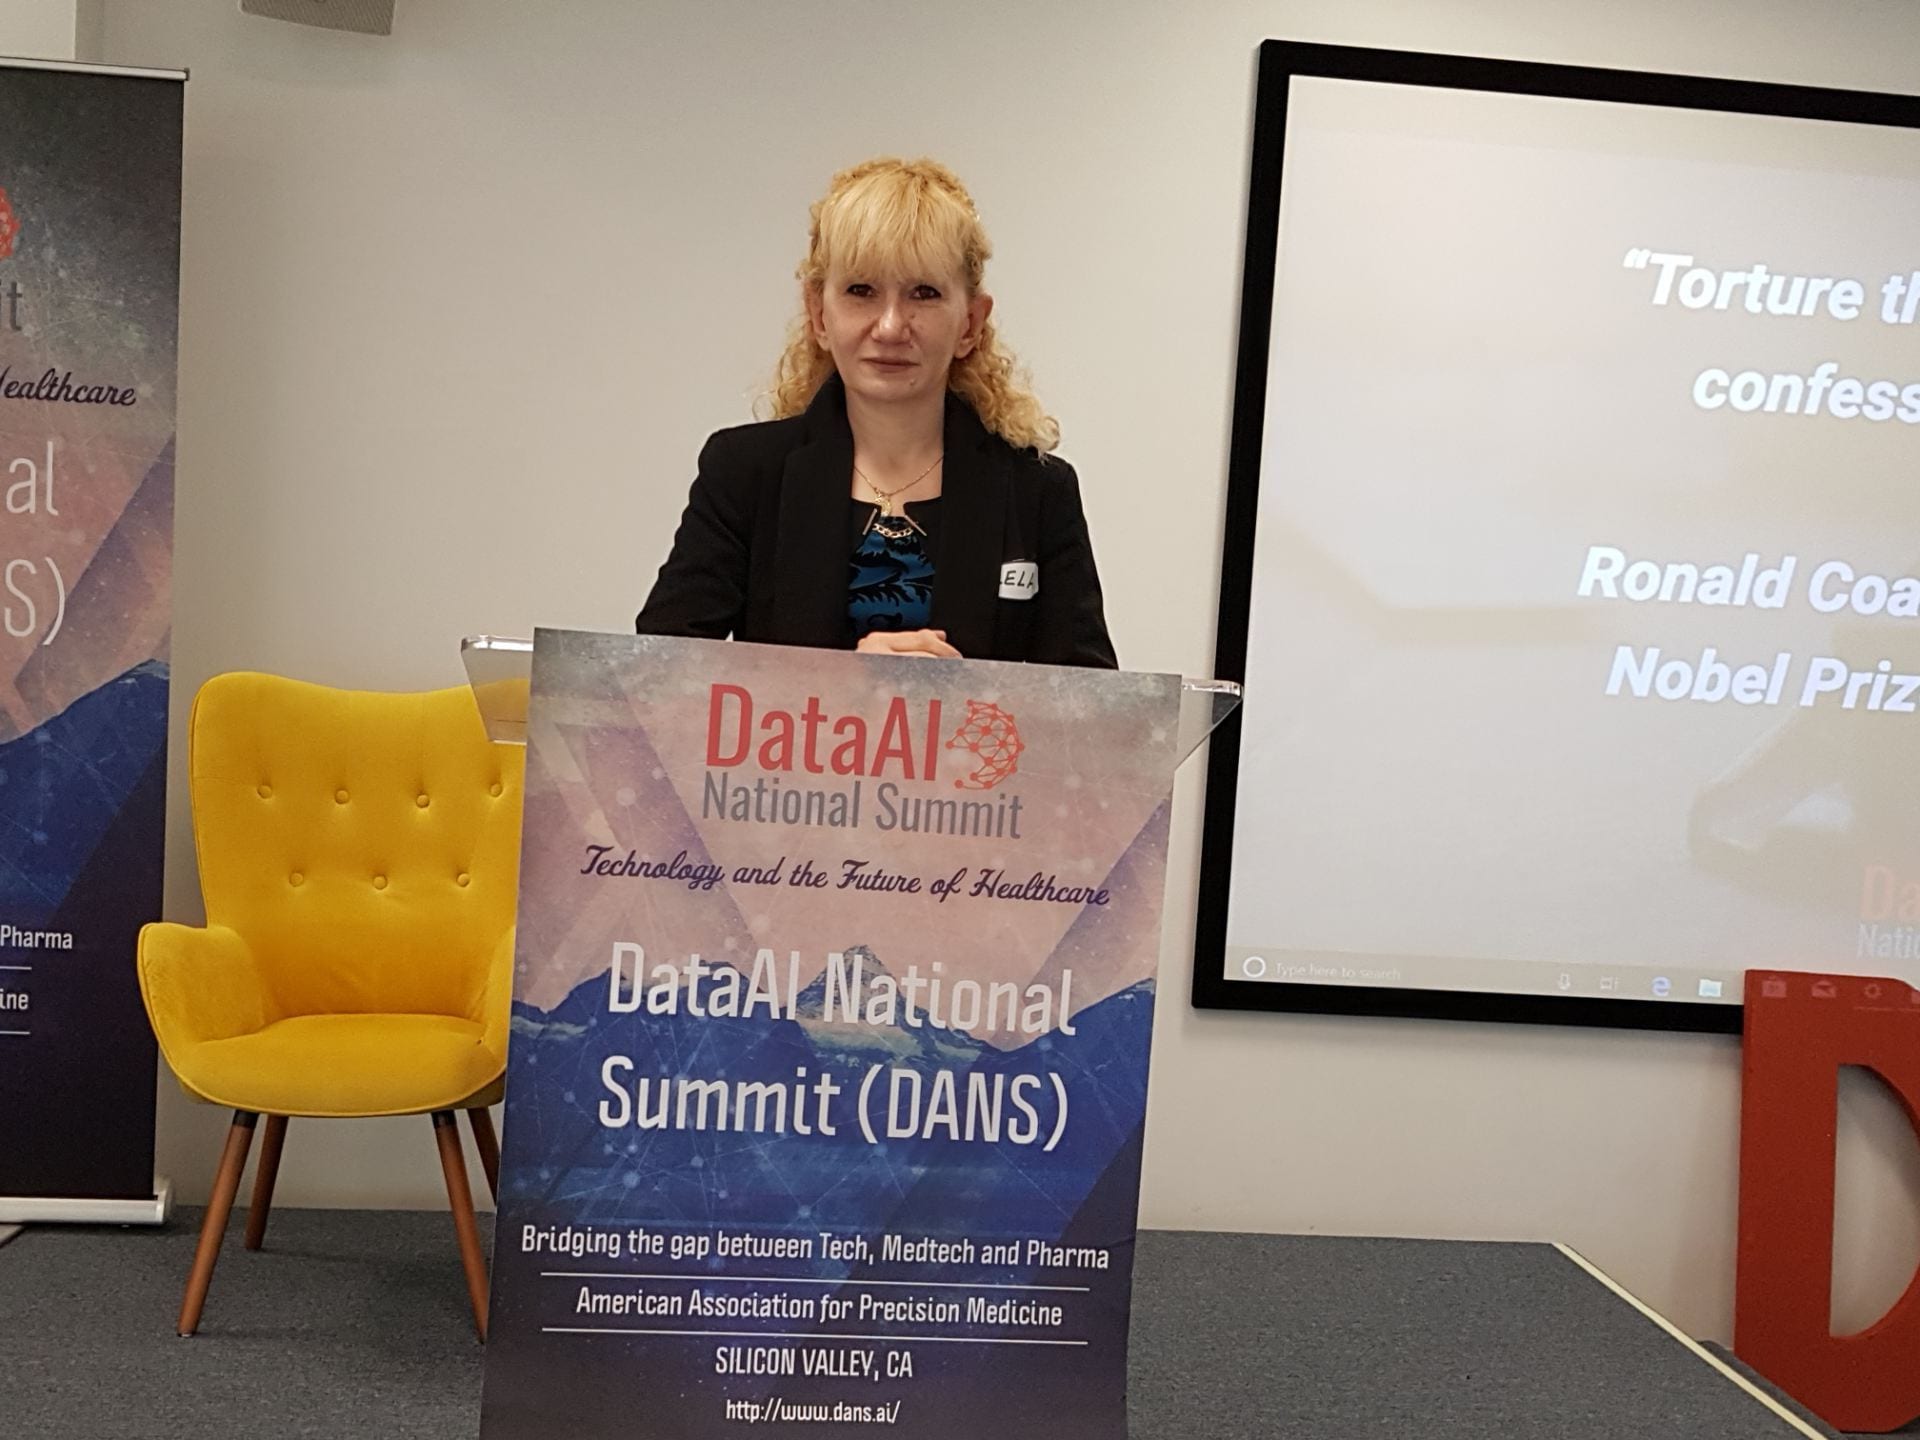 Lela Mirtskhulava was a featured speaker at DataAI National Summit (DANS), Silicon Valley organized by American Association of Precision Medicine and presented the results of the project she has been working since arriving at San Jose State as a Fulbright Scholar.